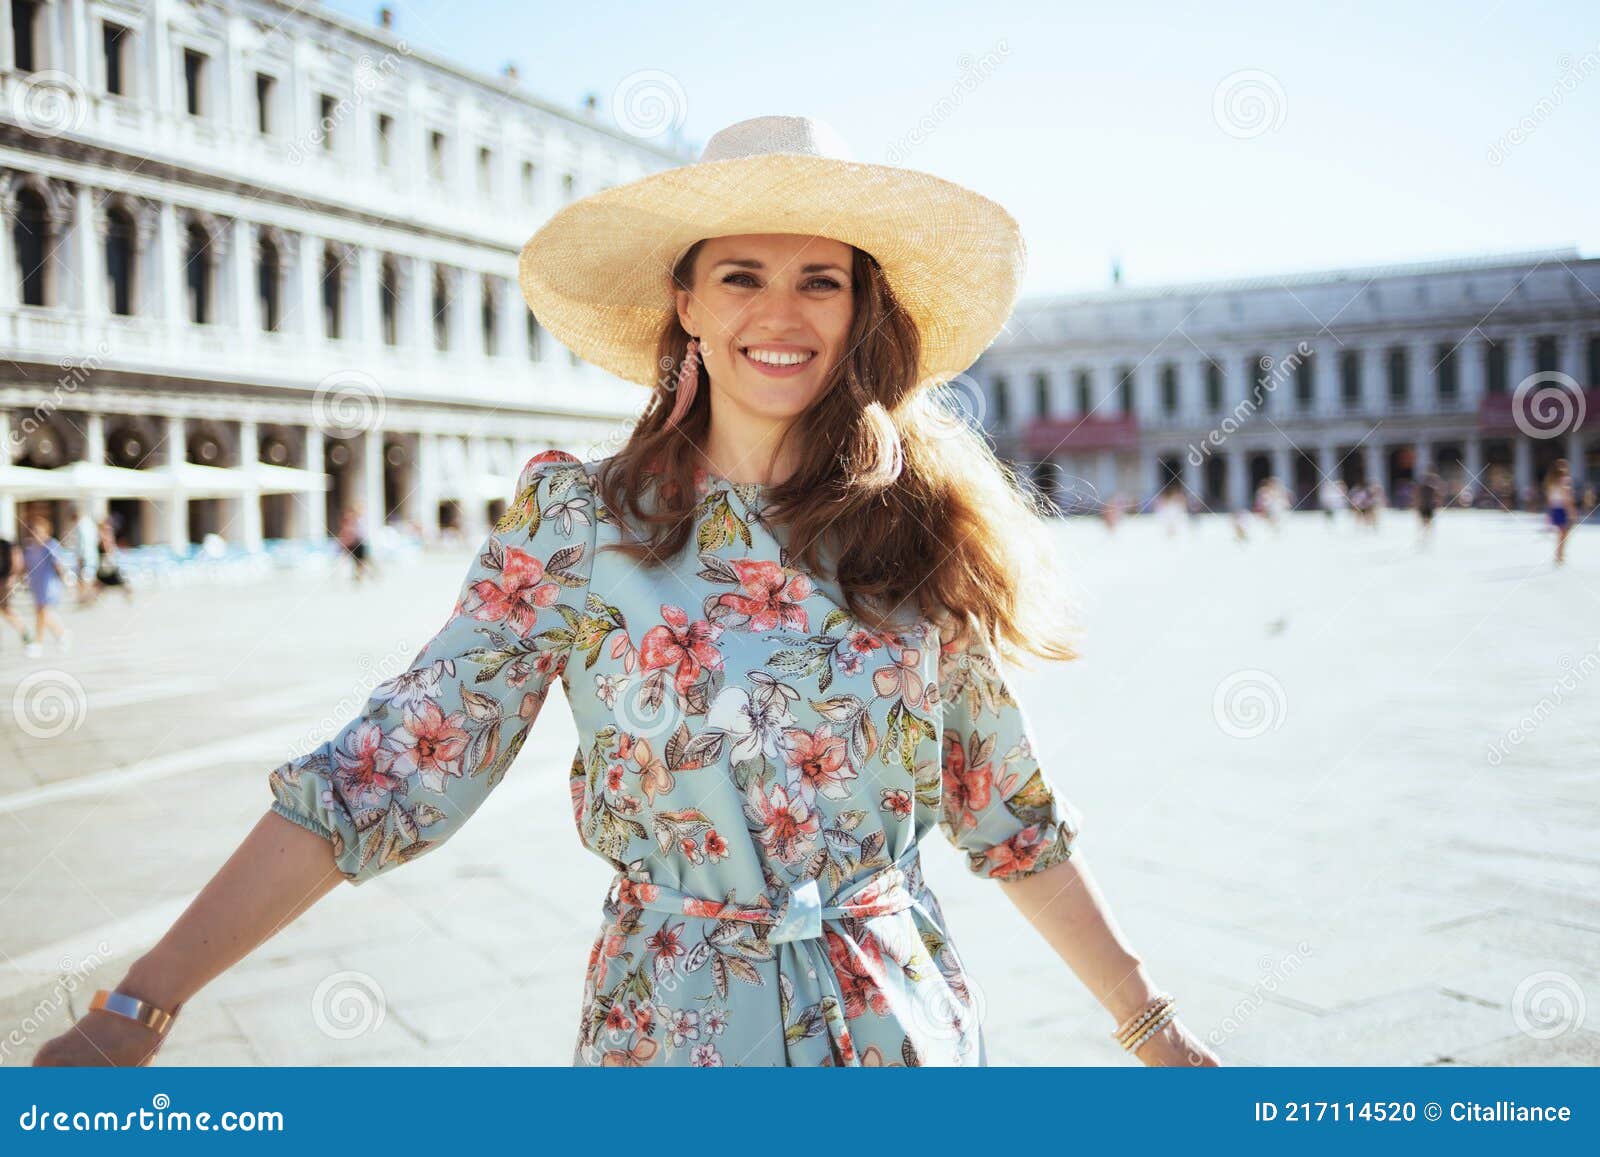 happy modern woman in floral dress exploring attractions